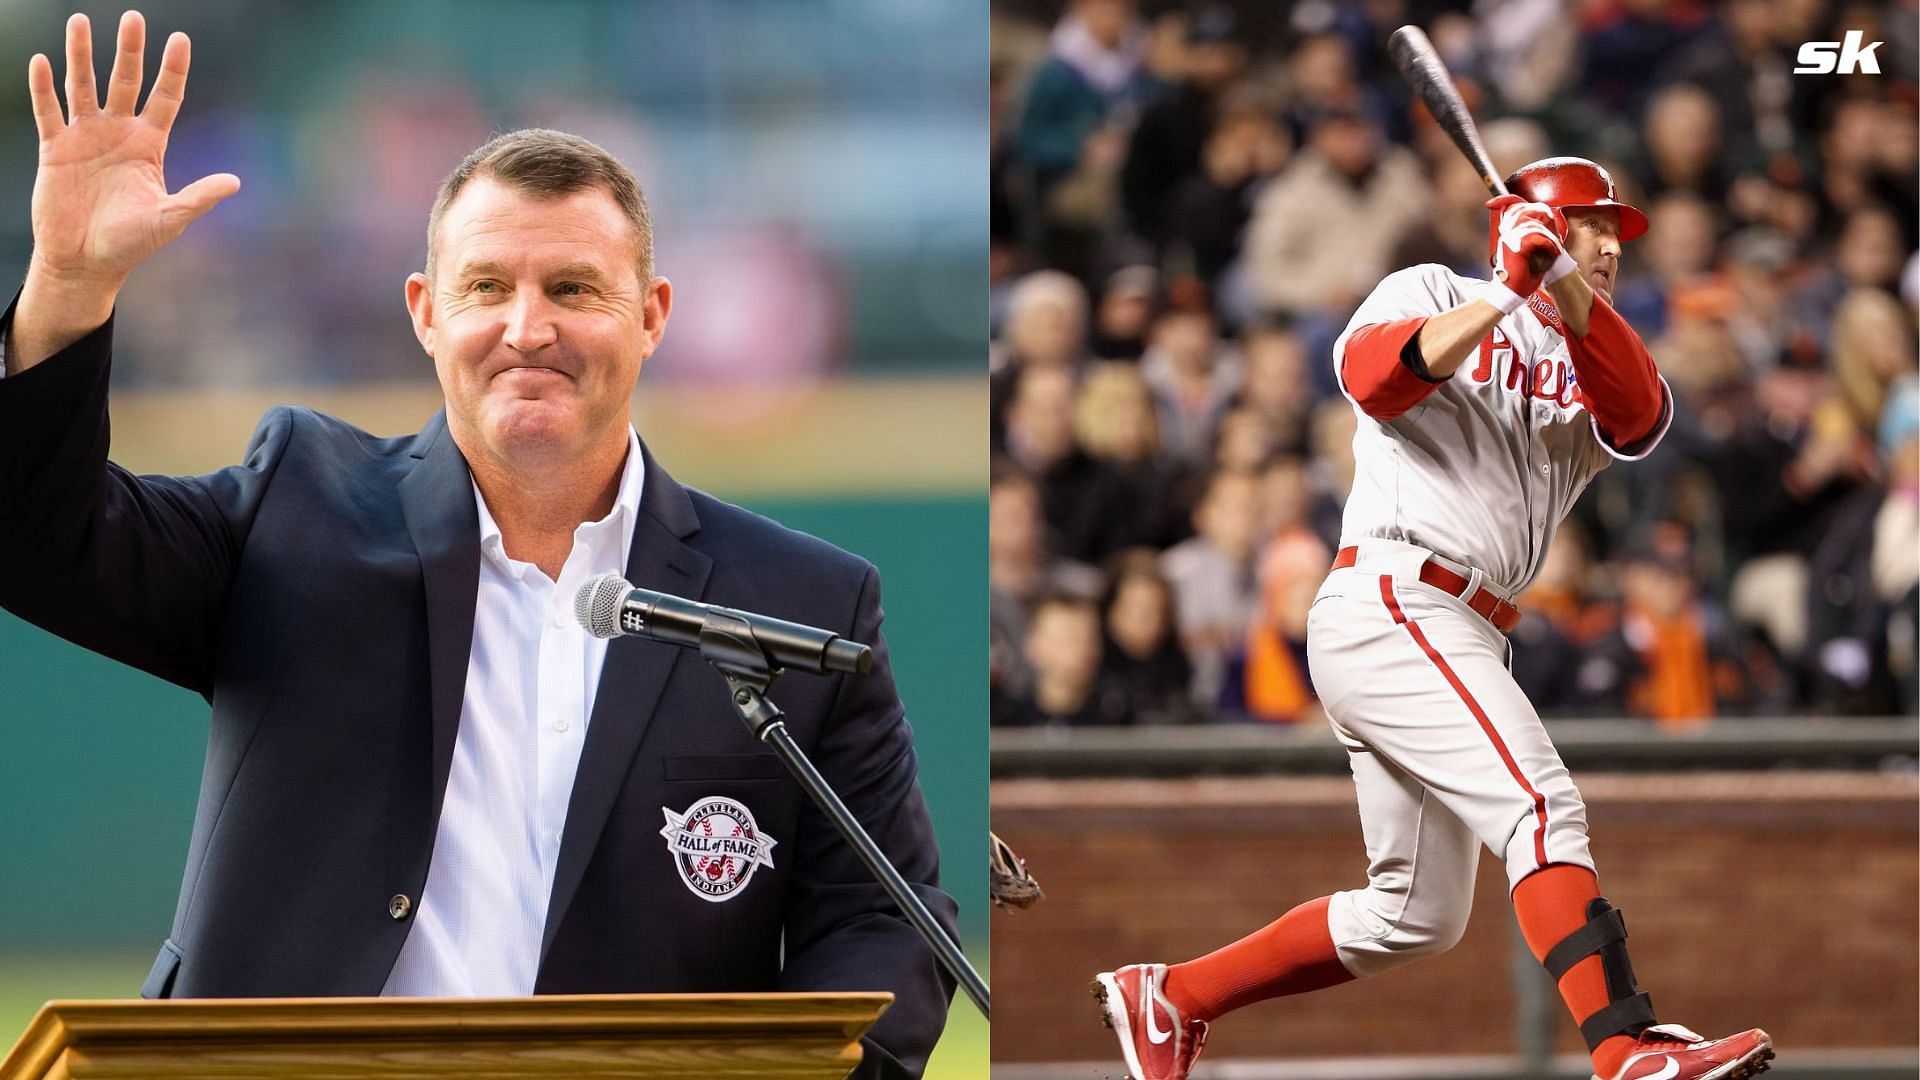 Jim Thome: Jim Thome took pride in never taking PEDs in his career